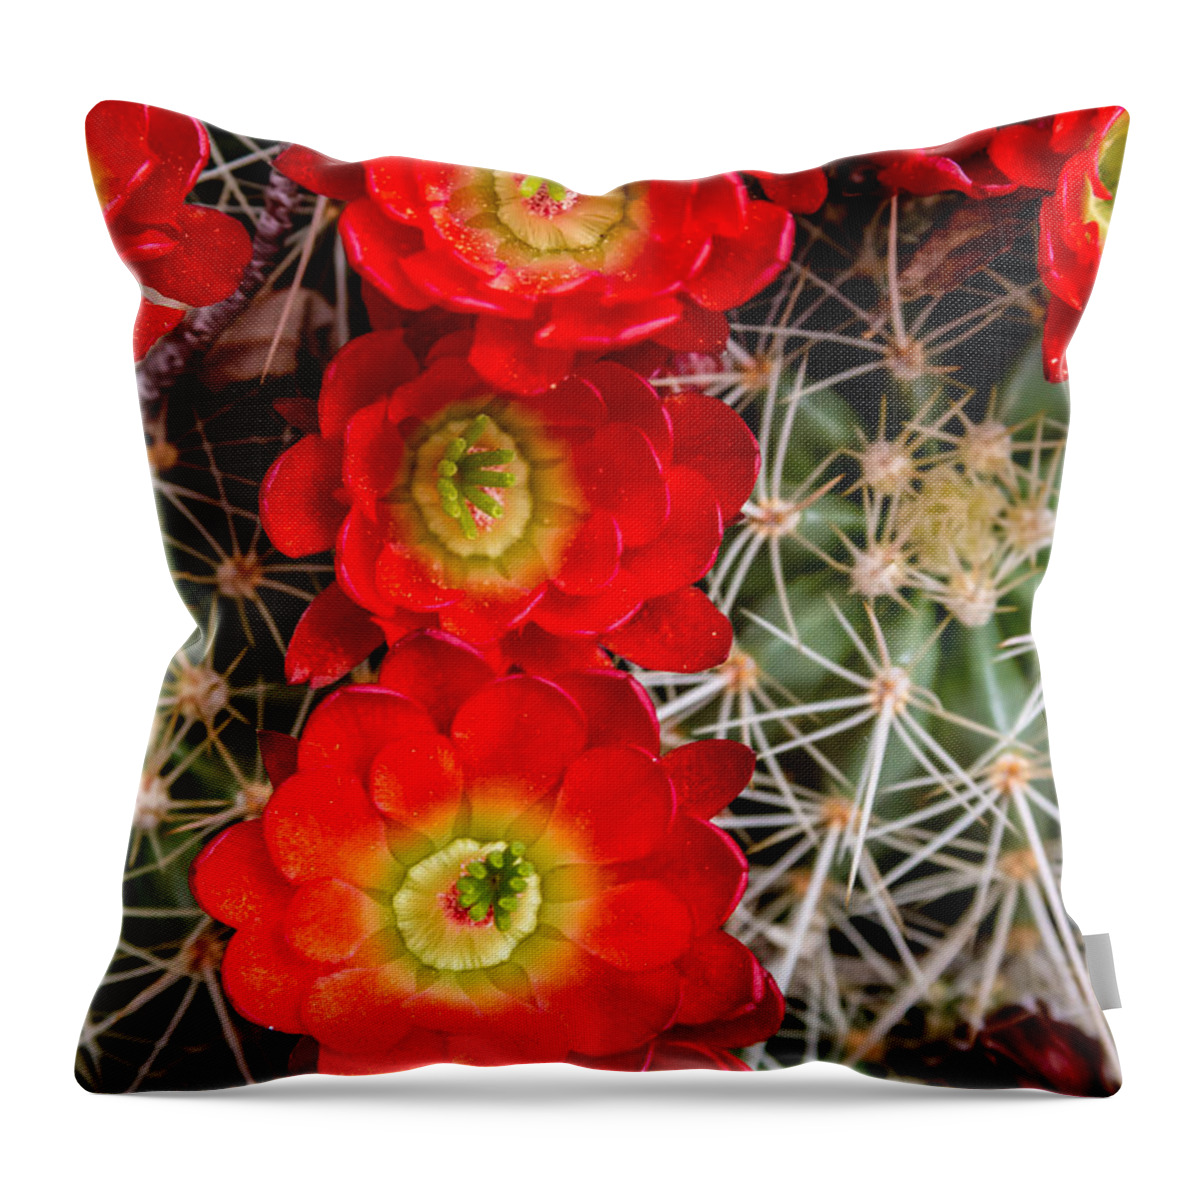 Barrel Throw Pillow featuring the photograph Desert Blooms by Teri Virbickis